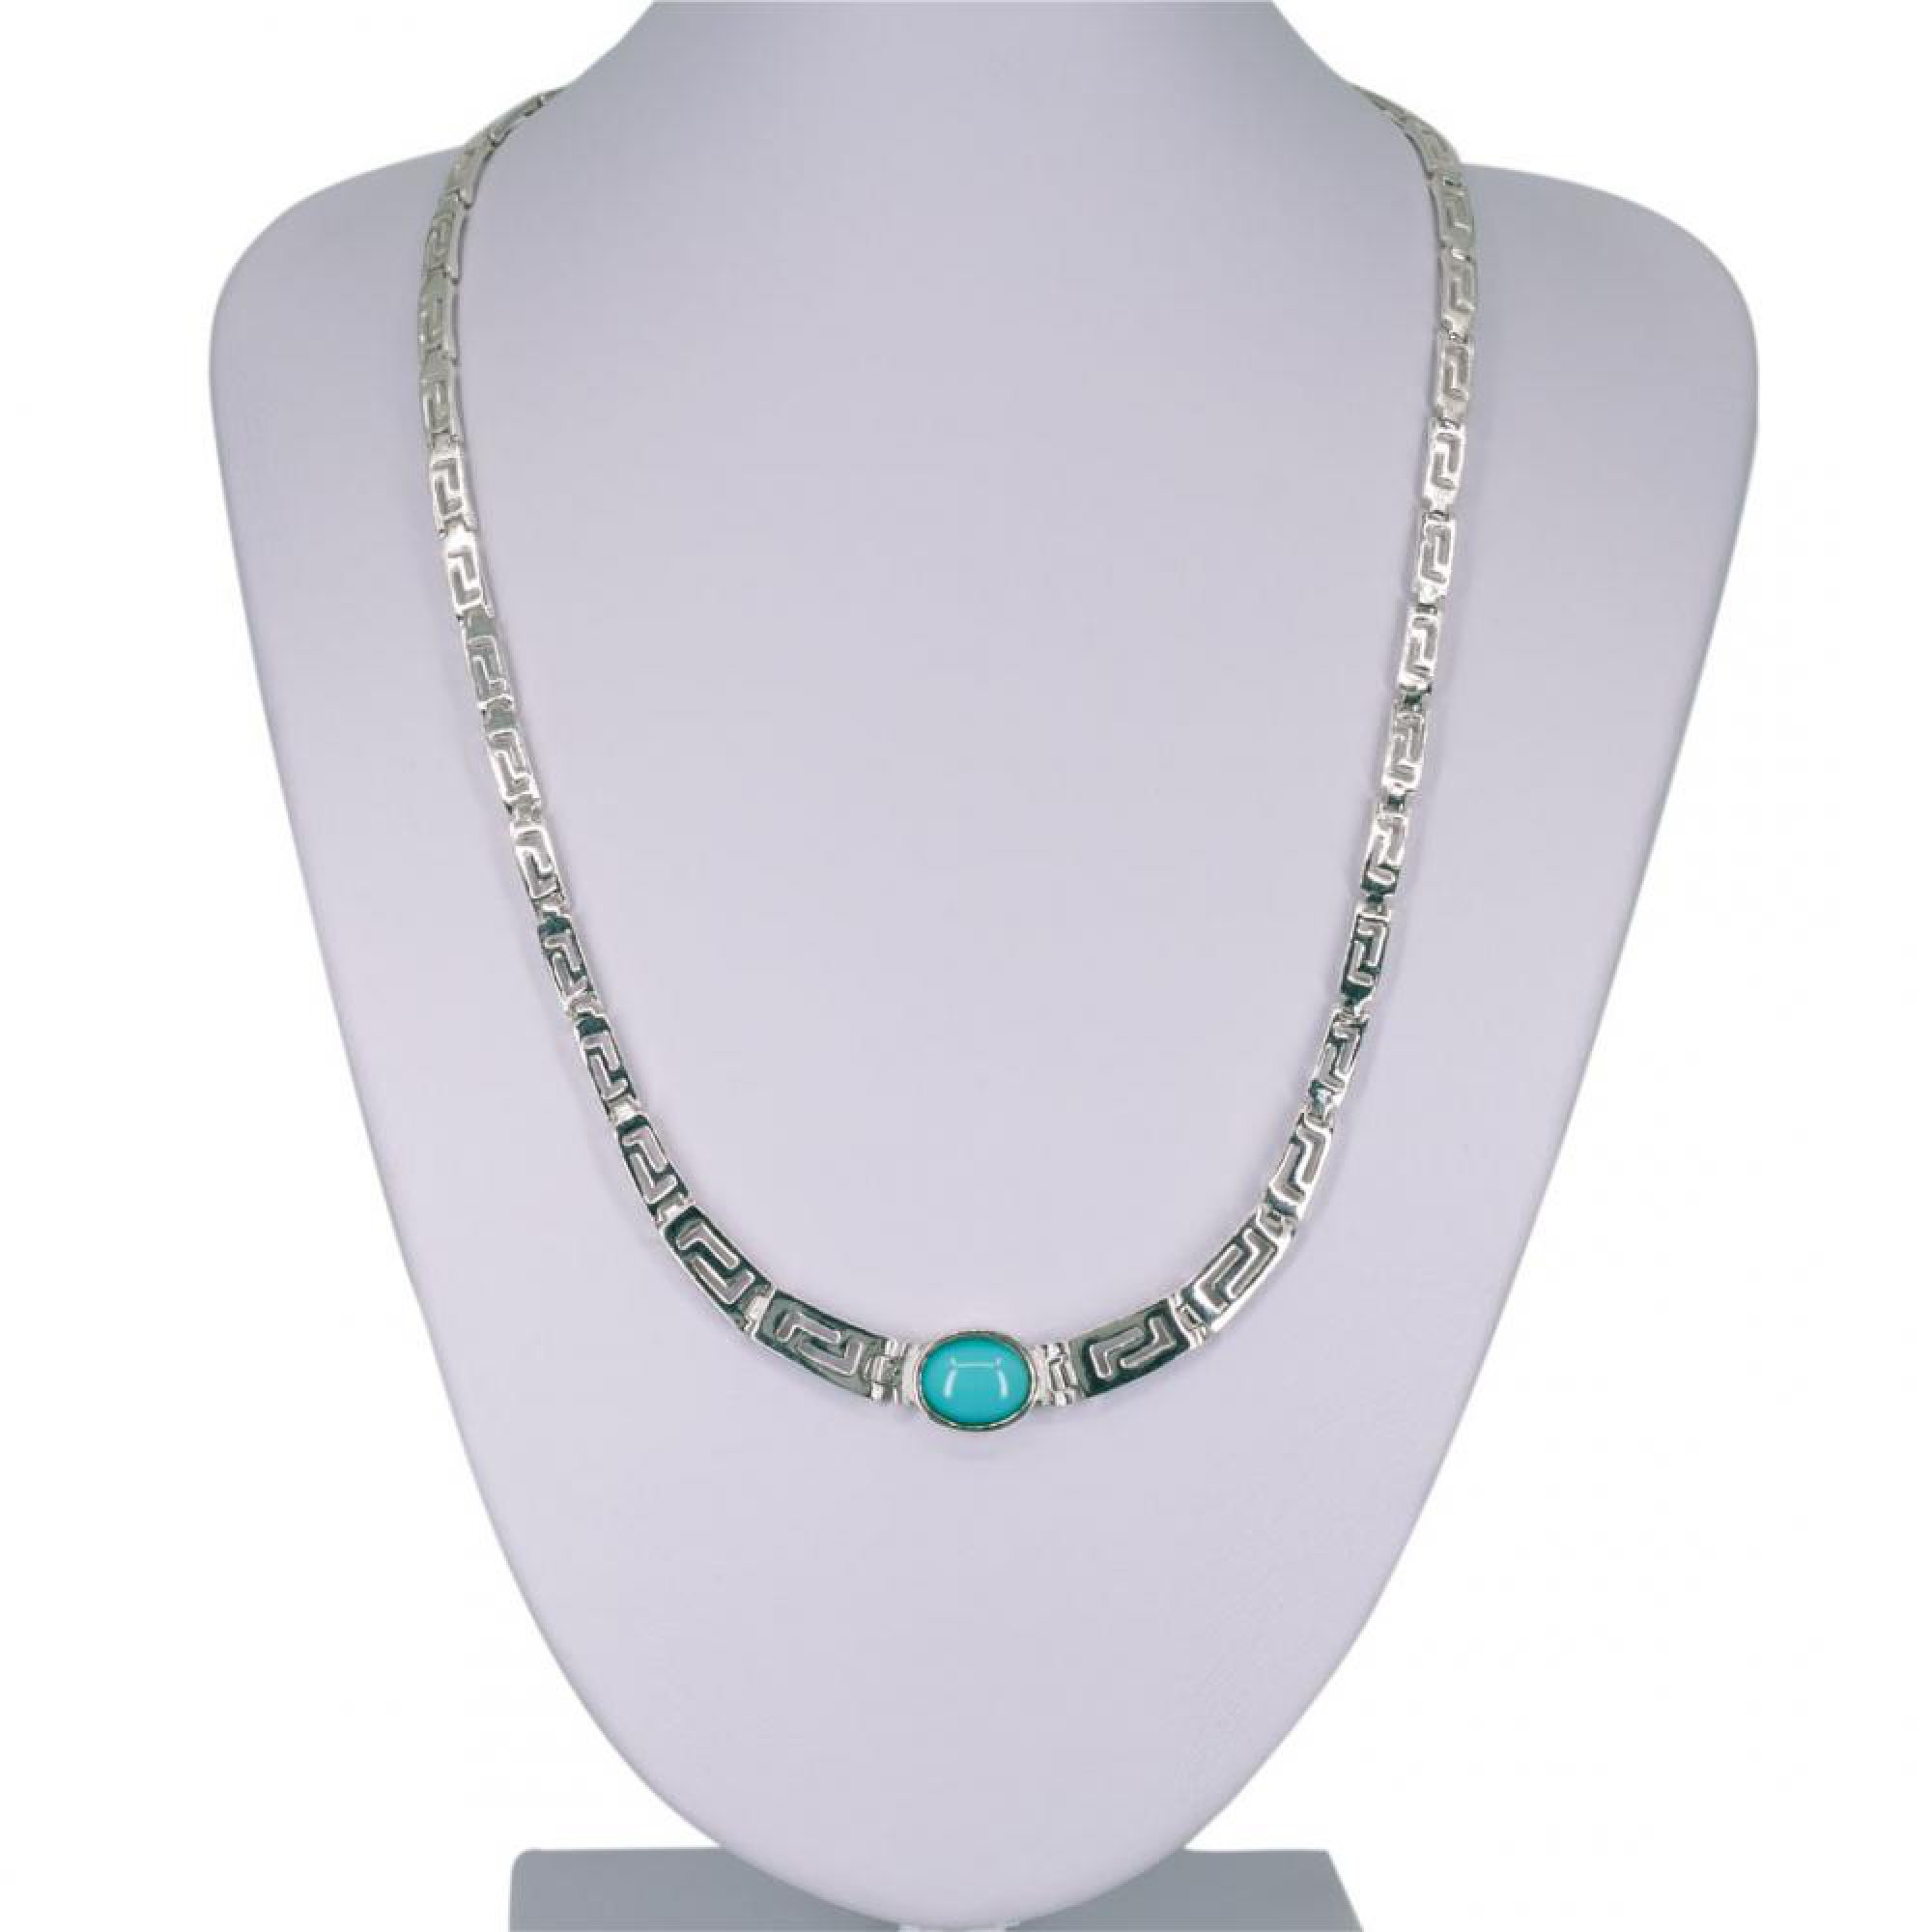 Meander necklace with turquoise stone